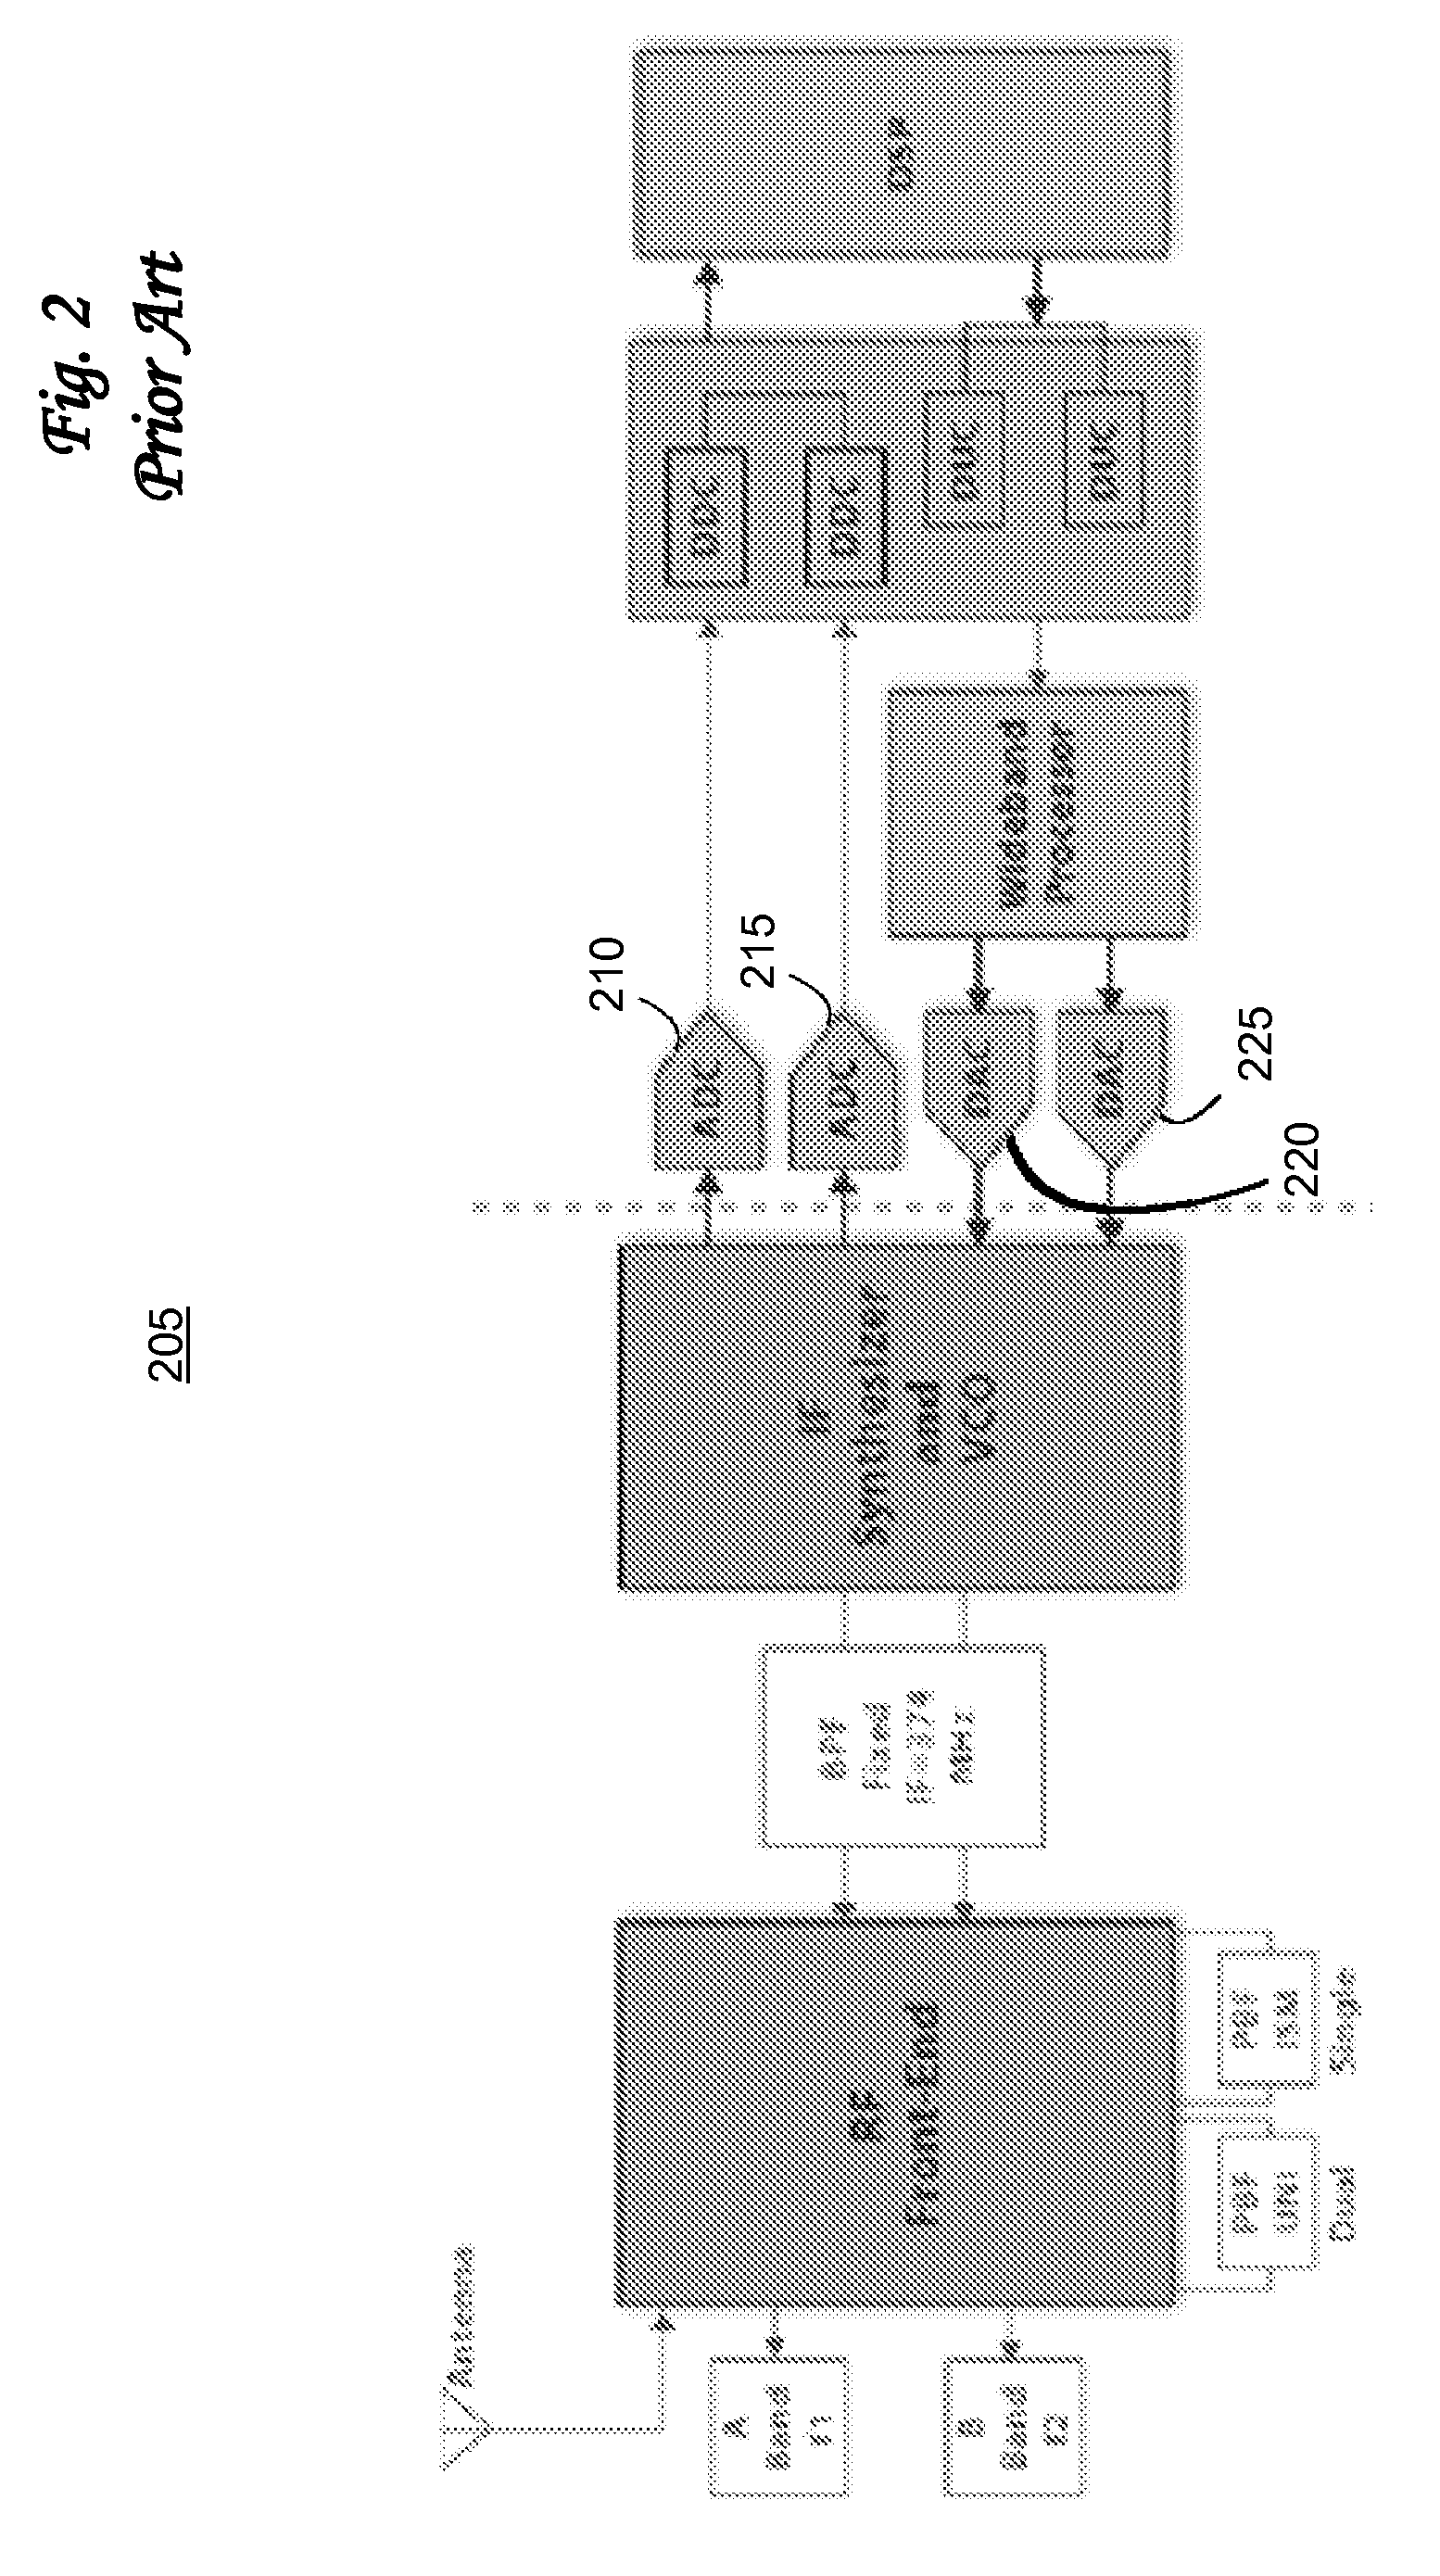 Systems and methods for electromagnetic band gap structure synthesis